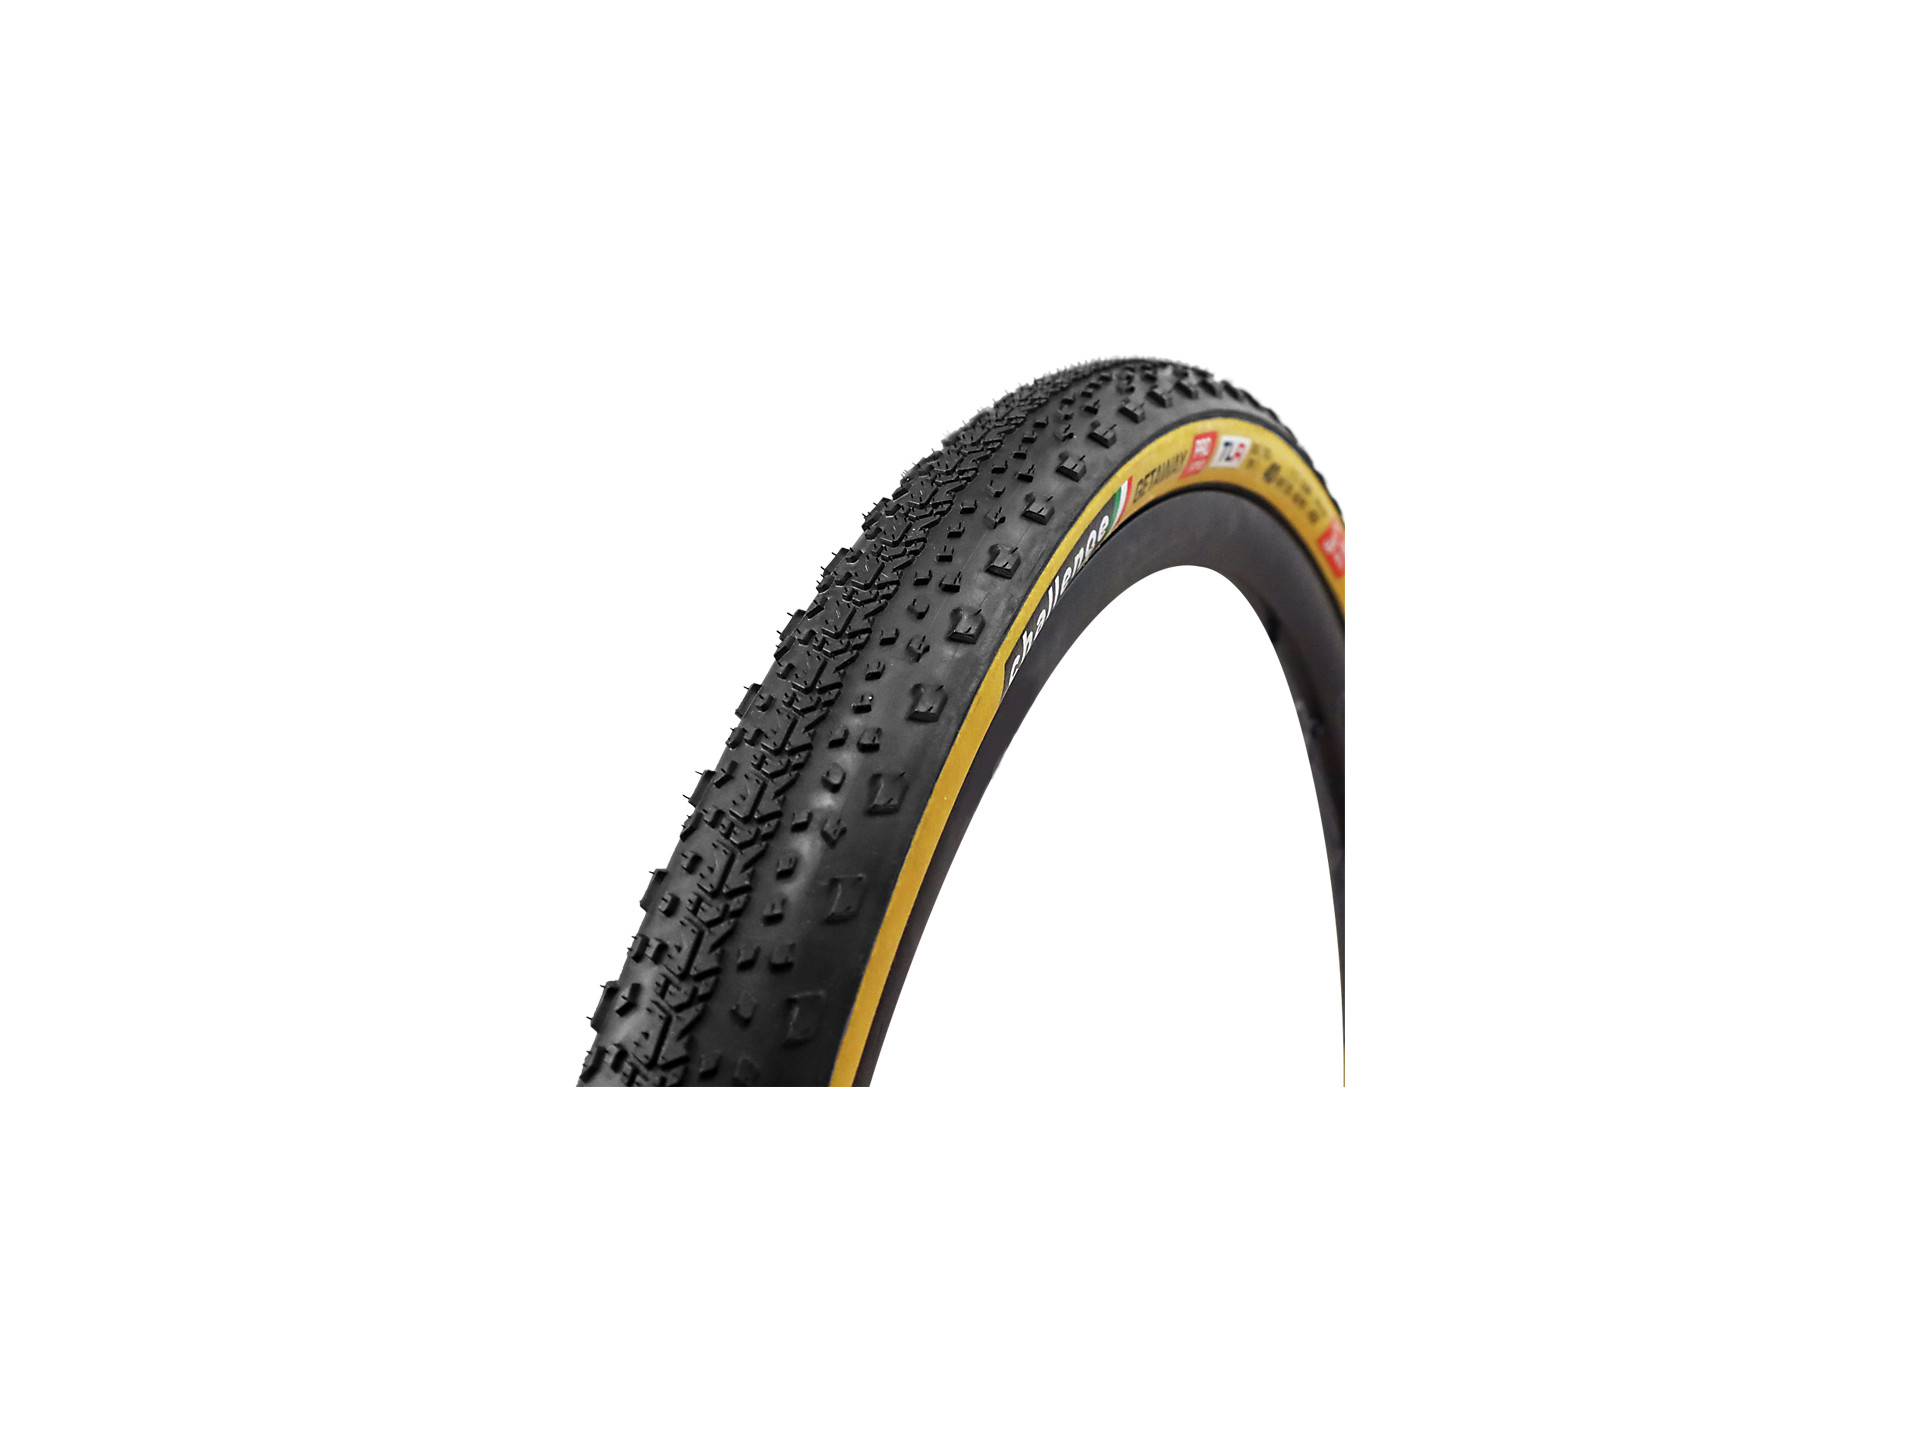 Challenge Chicane 700 X 33 Tire Tubular Black CX Folding 300tpi Cyclecross for sale online 